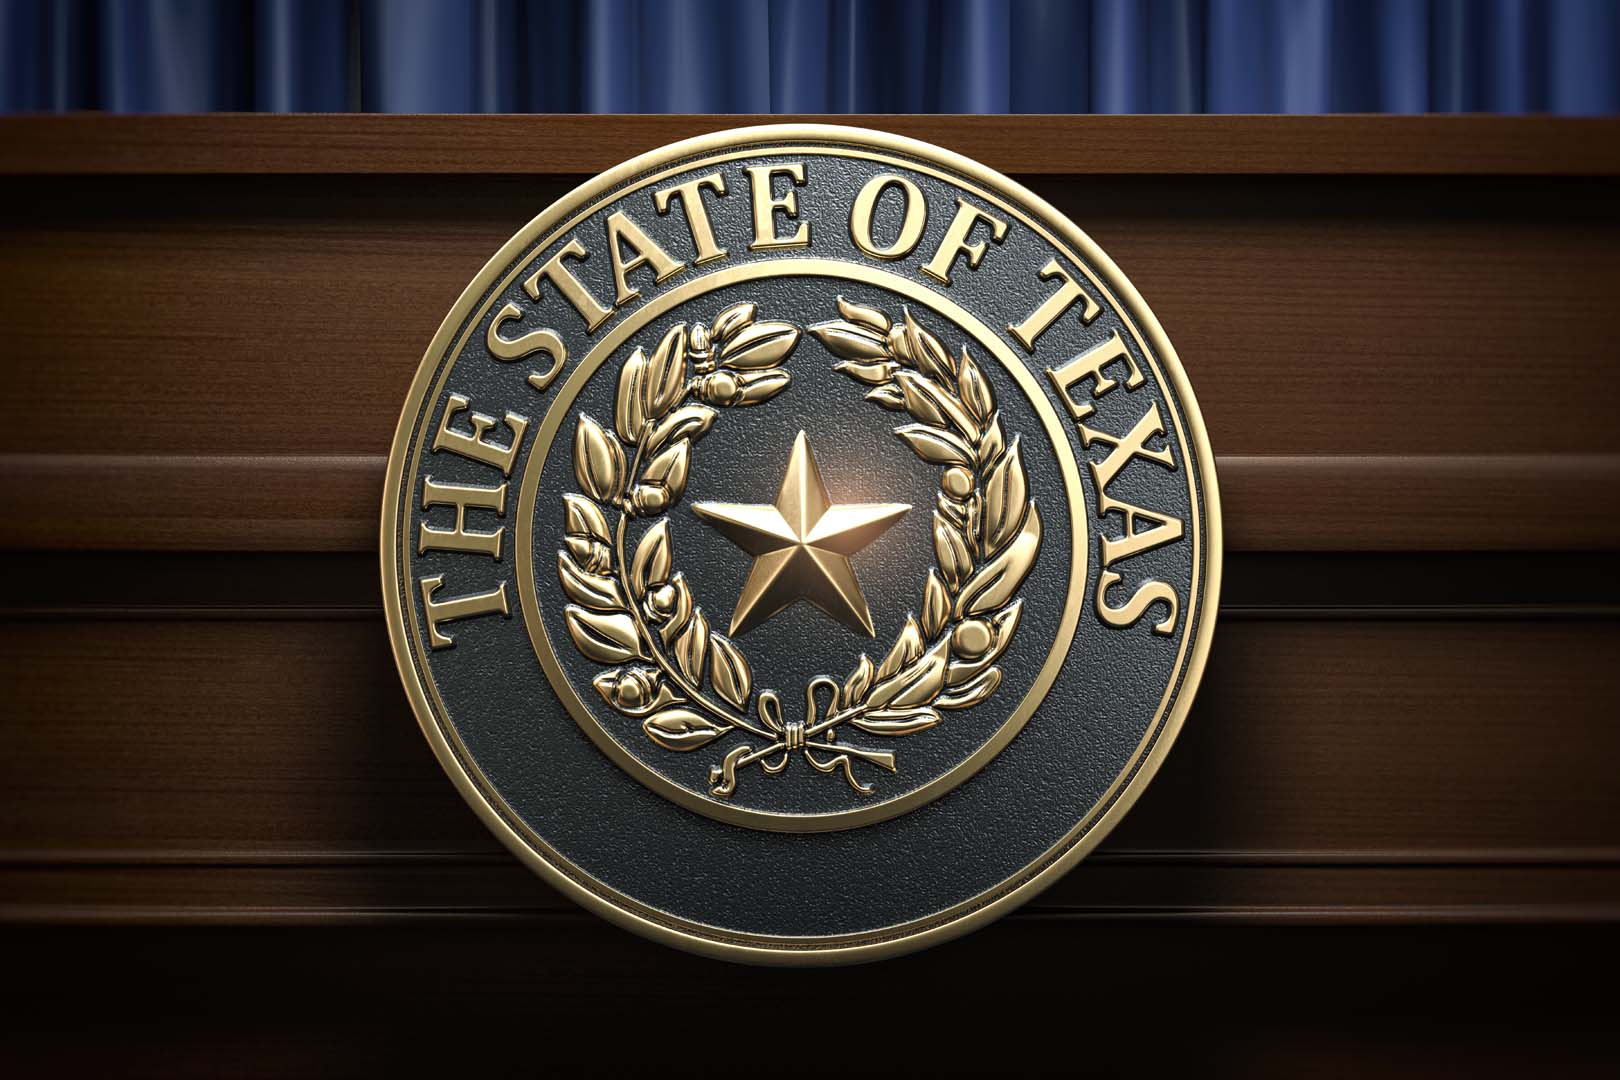 Texas Judicia System comprises of may courts including the 13th court of appeals